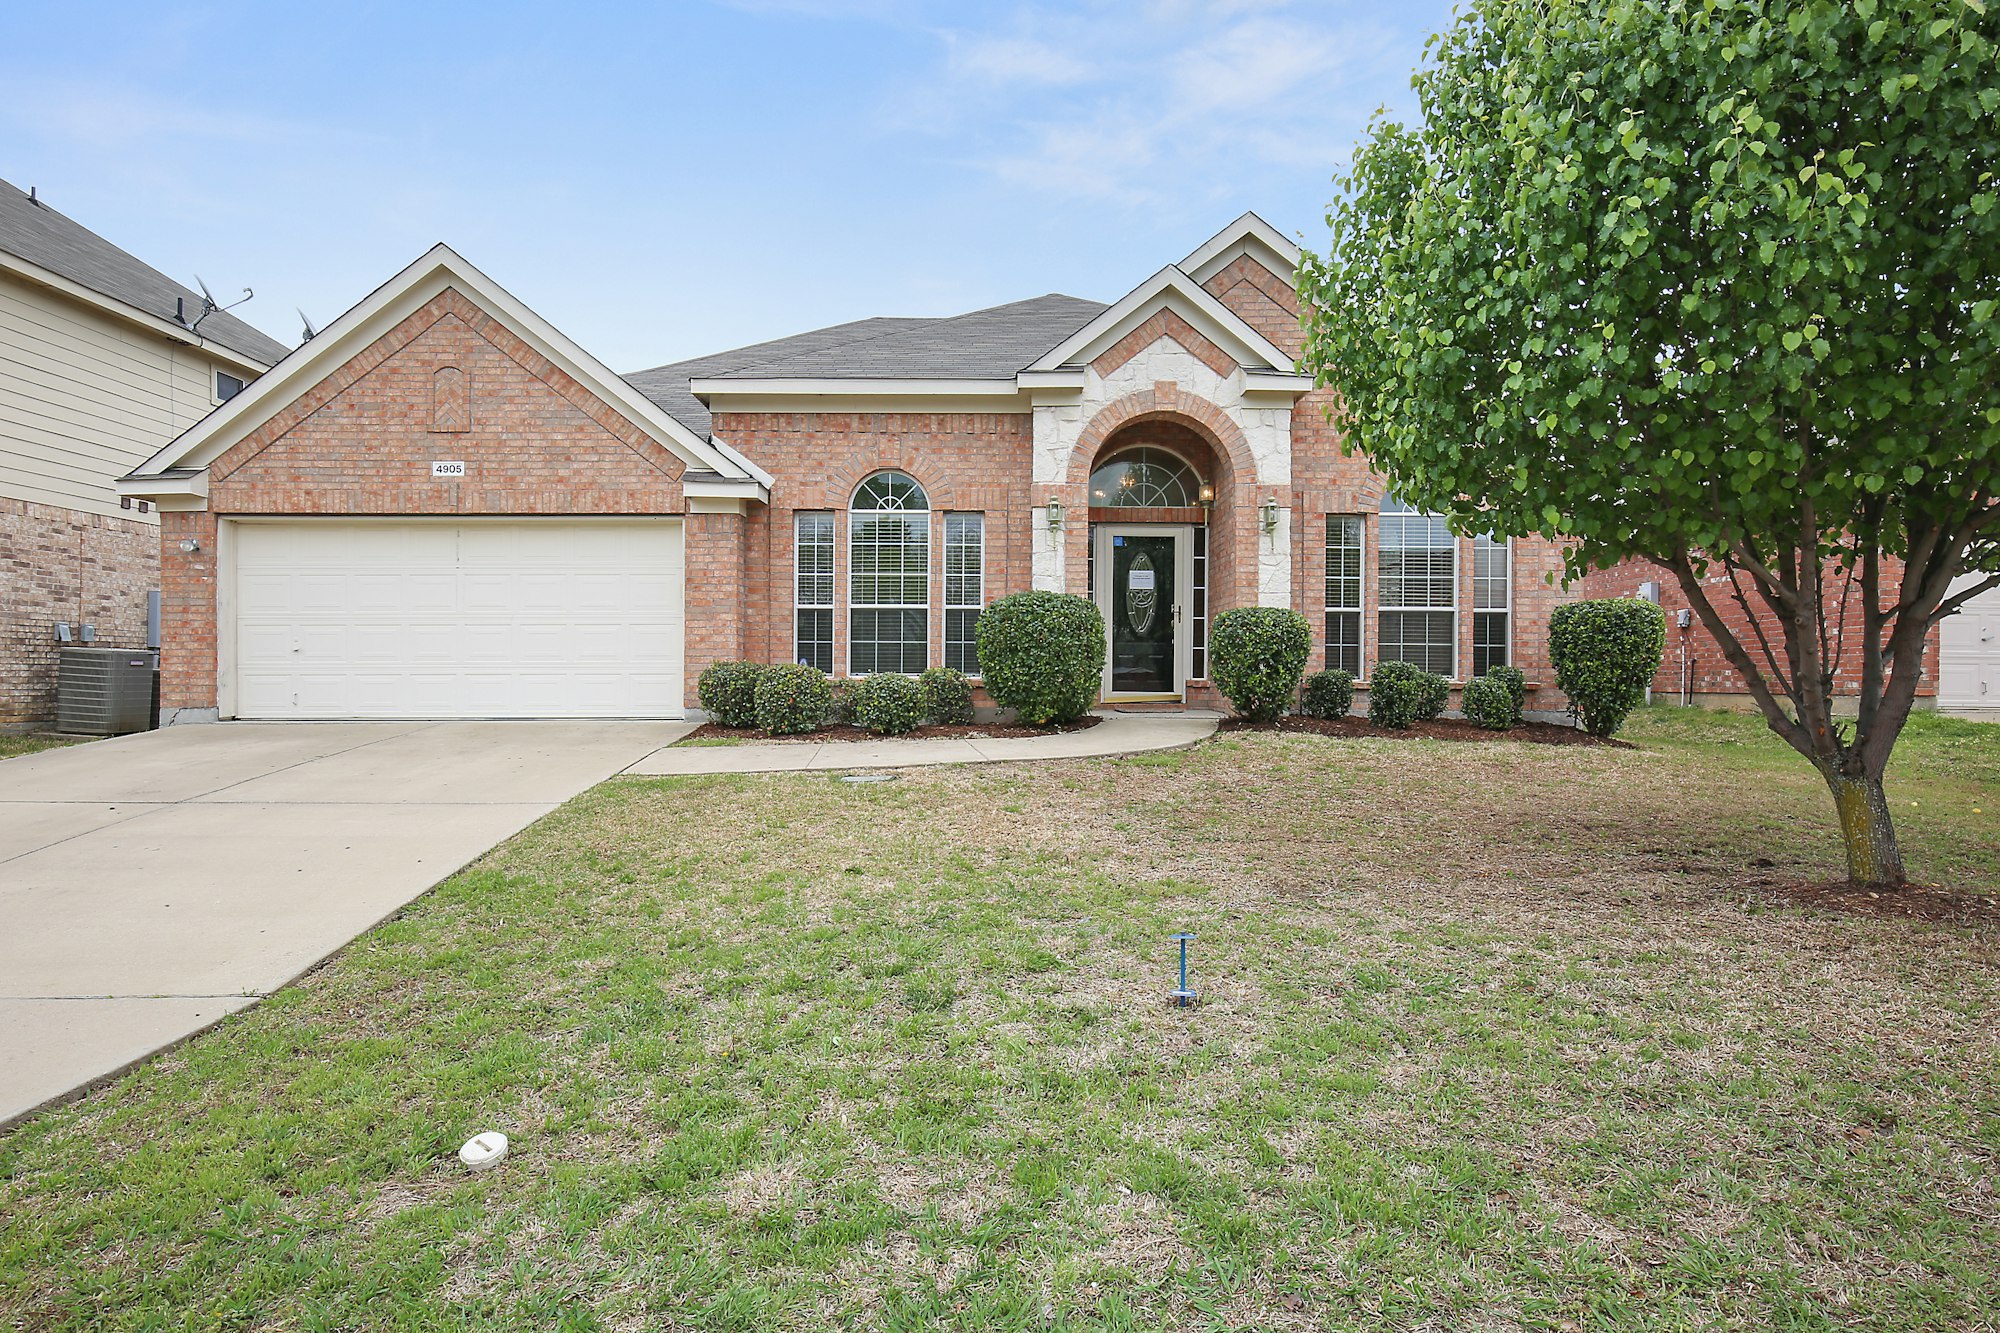 Photo 1 of 29 - 4905 Treeside Dr, Fort Worth, TX 76123